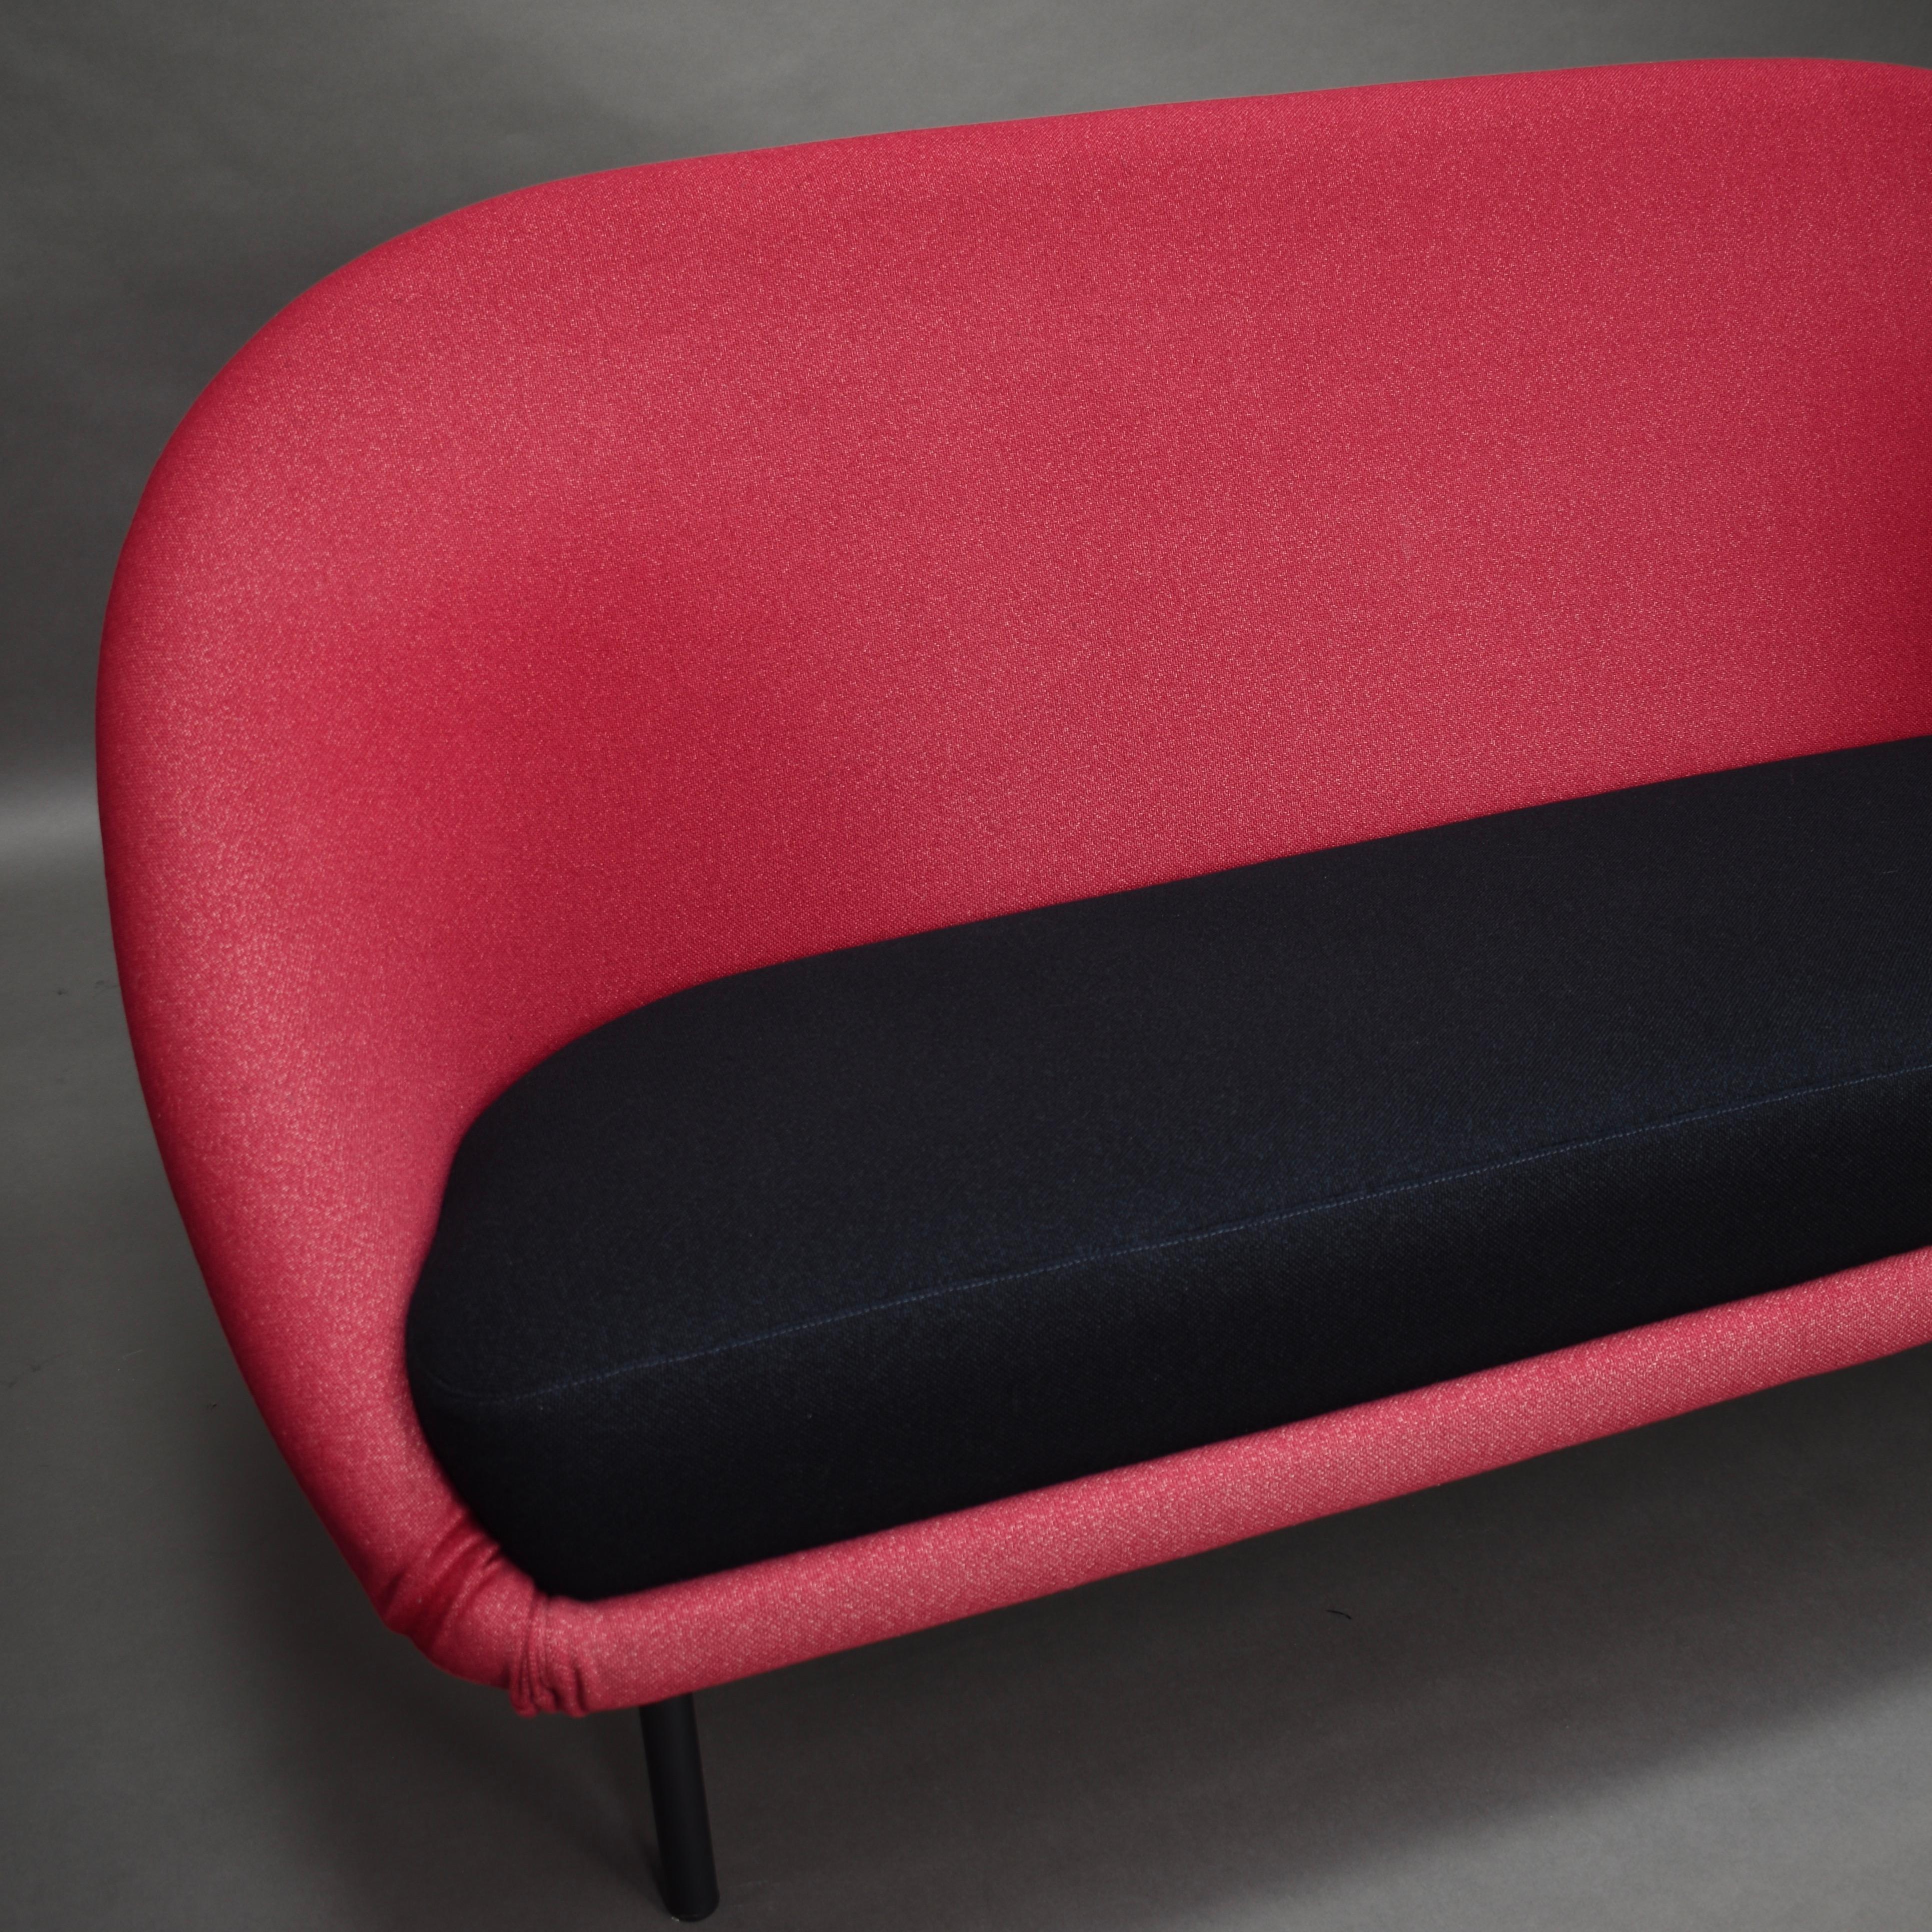 Theo Ruth f815 Sofa by Artifort, Netherlands, 1958 For Sale 2